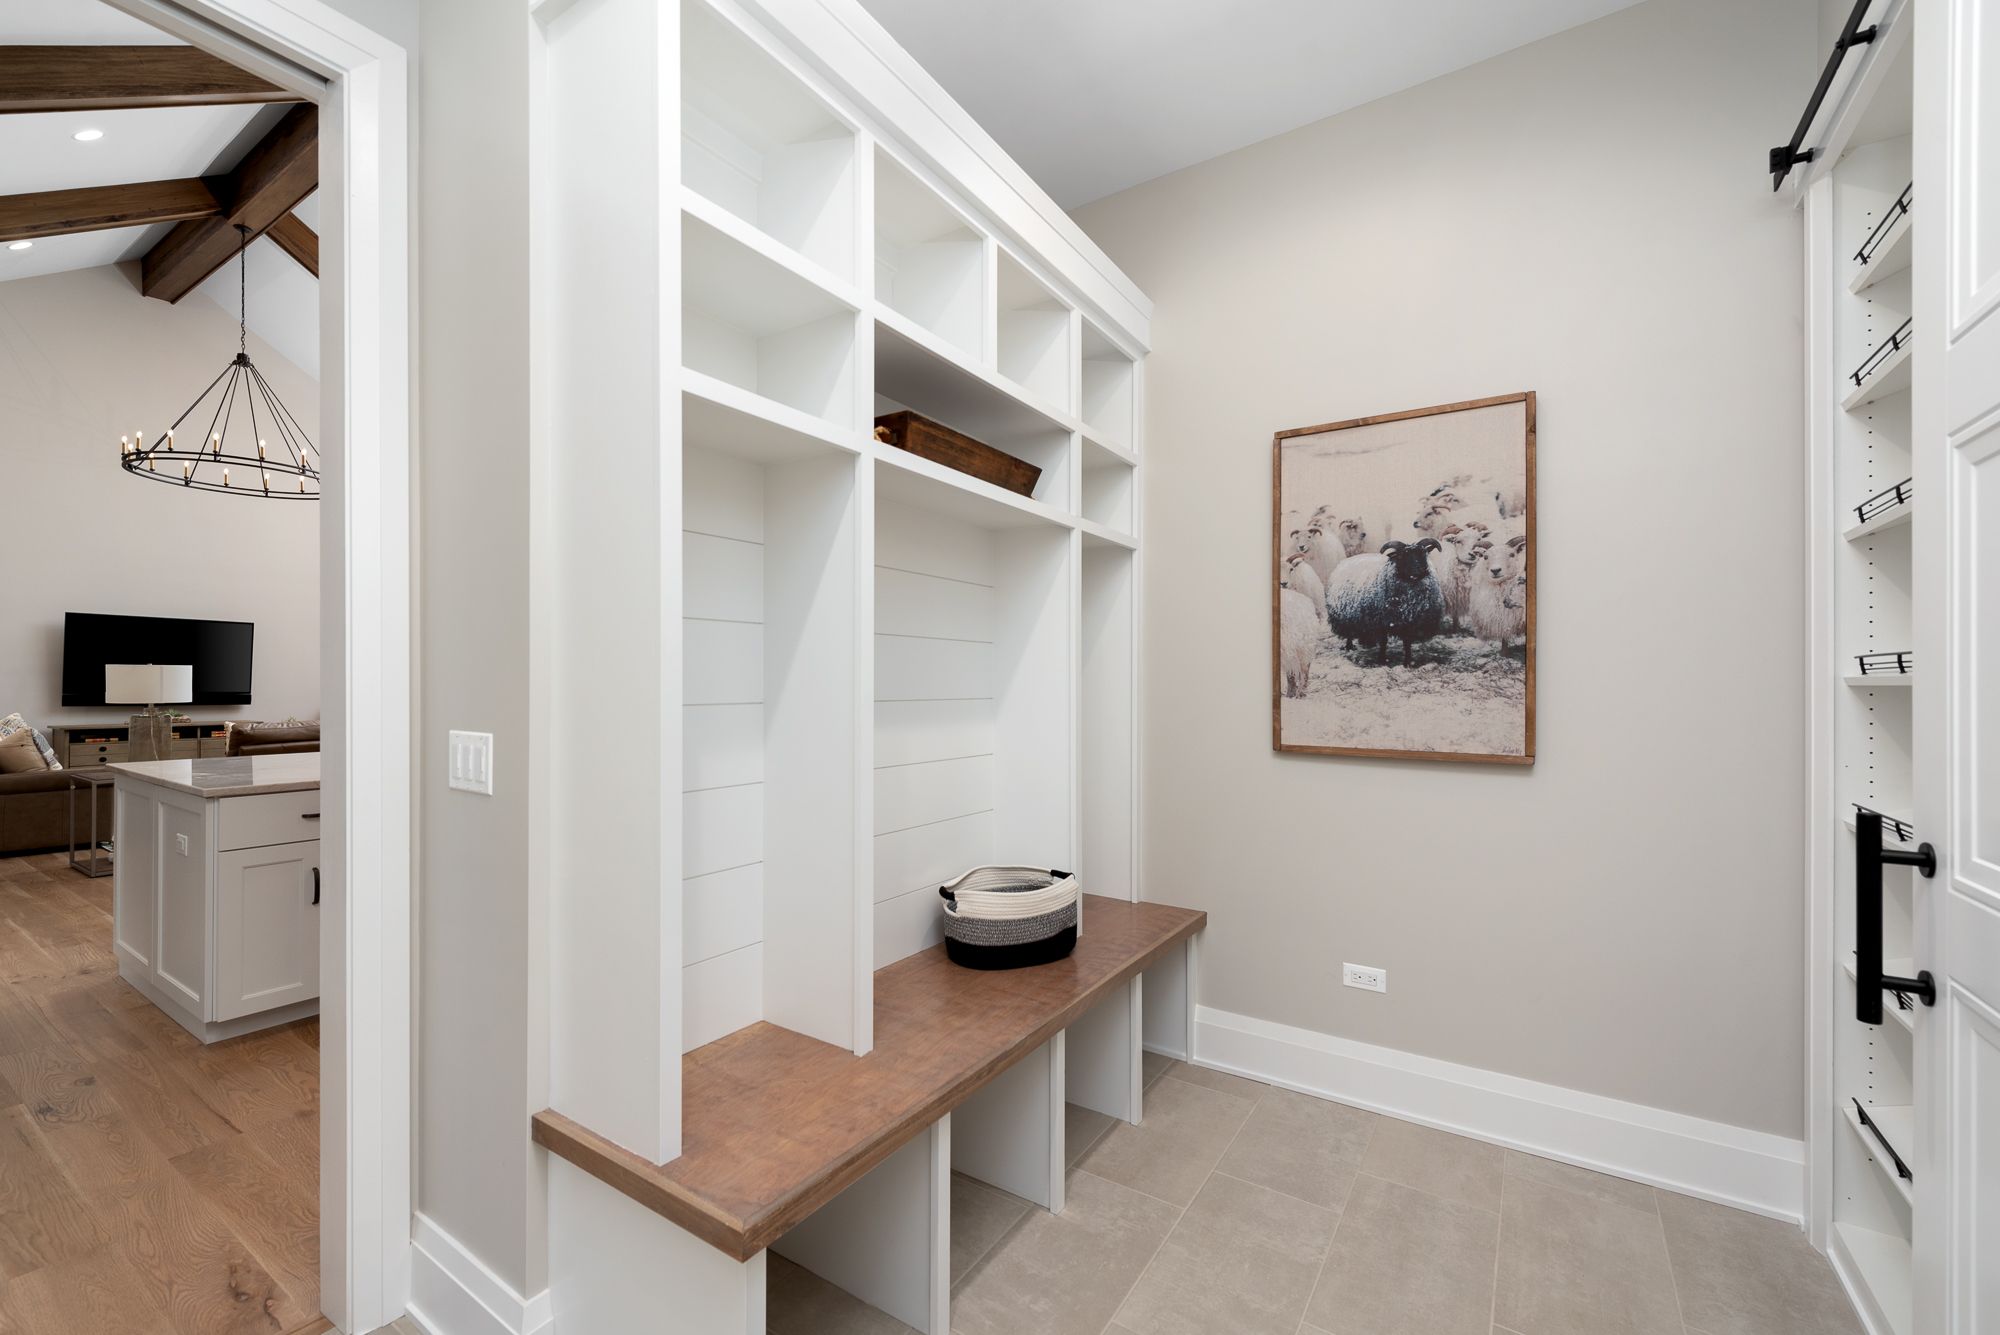 Mudroom with white built ins, bench with cubbies and sheep artwork